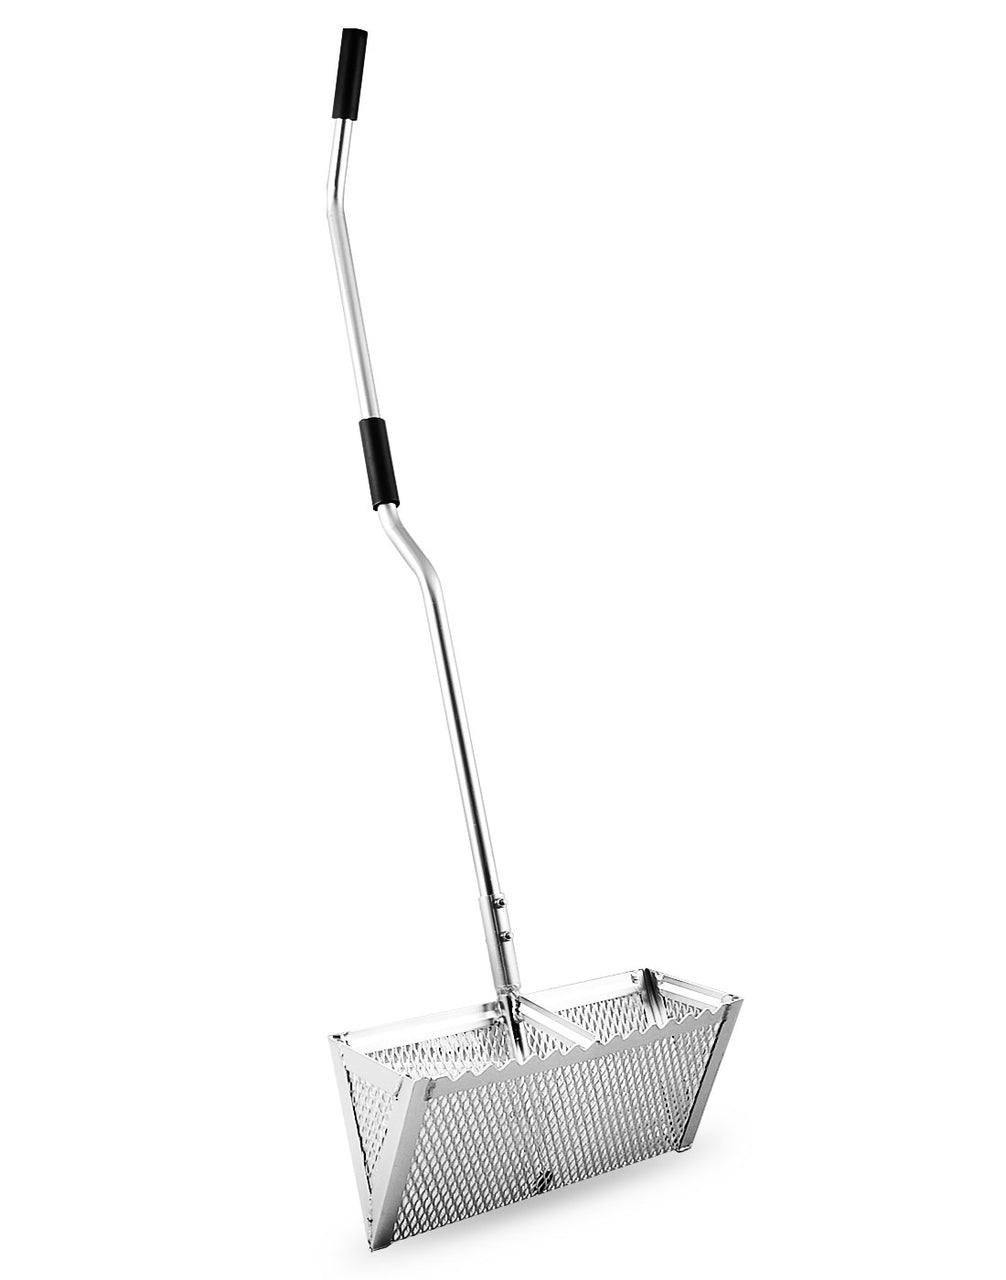 Exact Design Sand Flea Rake, Anodized Aluminum One Piece Strong 52” Long Handle, 16-Inches Wide Basket, Sharp Teeth, Curved Handle Design [Revision Version]